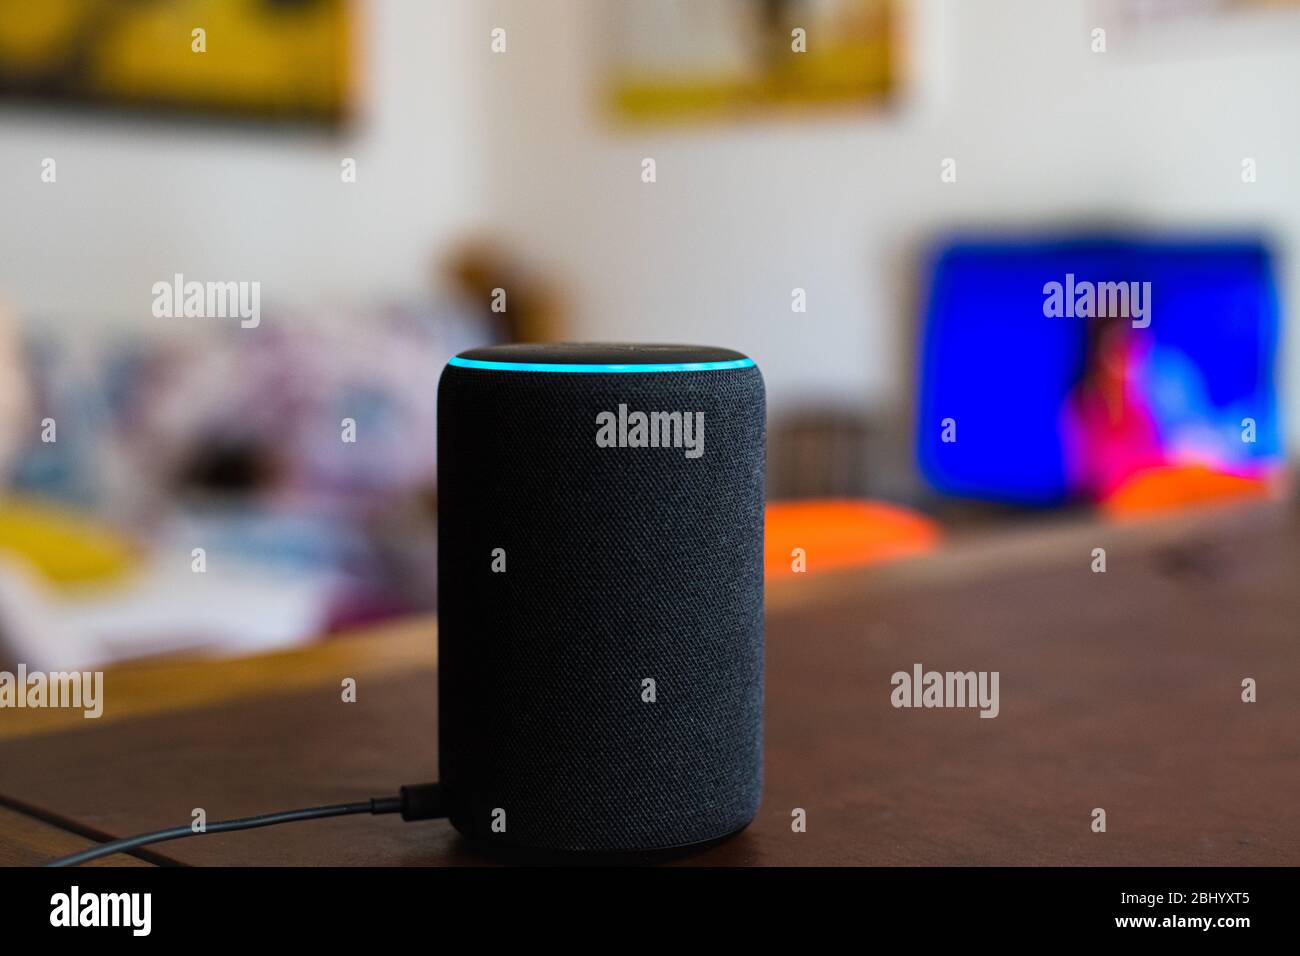 Alexa Smart Assistant Device Connected At Home Stock Photo -  Download Image Now - iStock